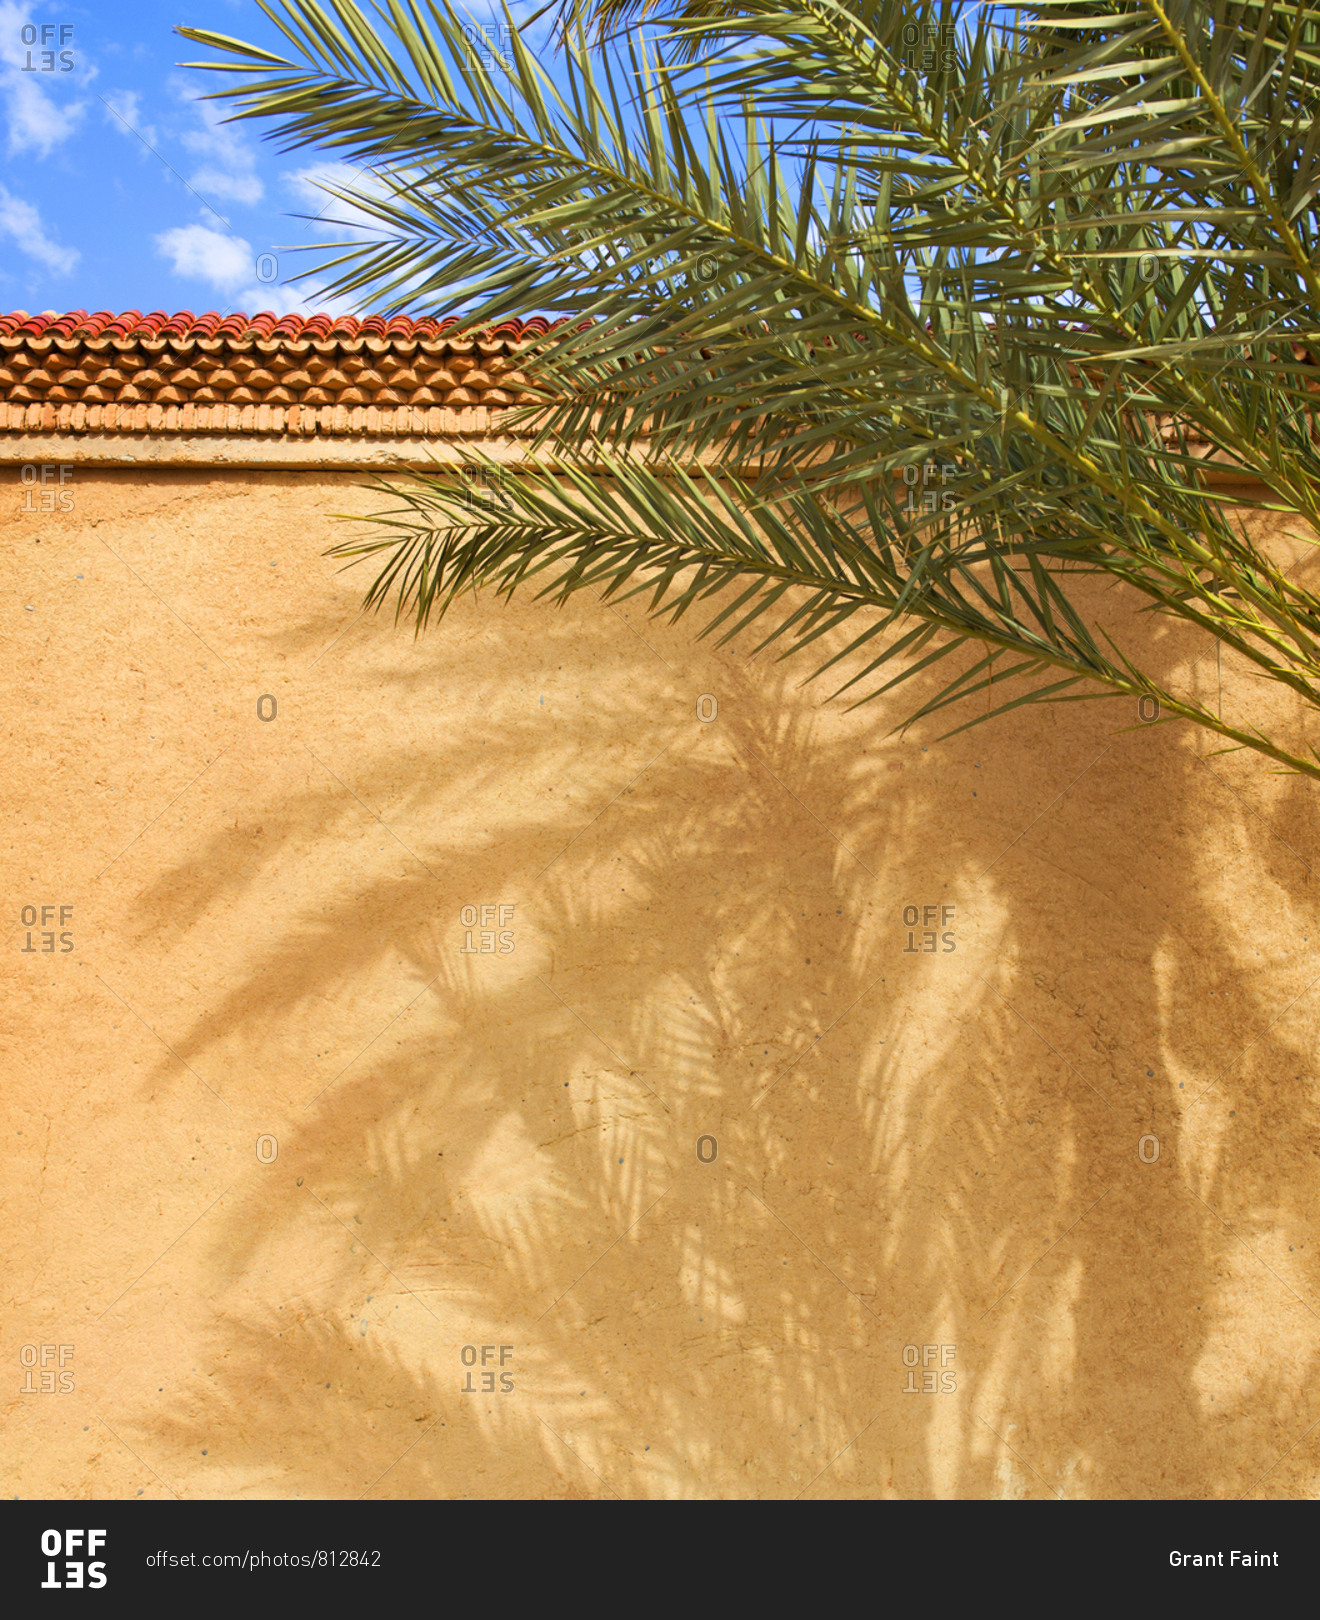 Hotel wall and date palm tree with shadows, Erfoud, Morocco